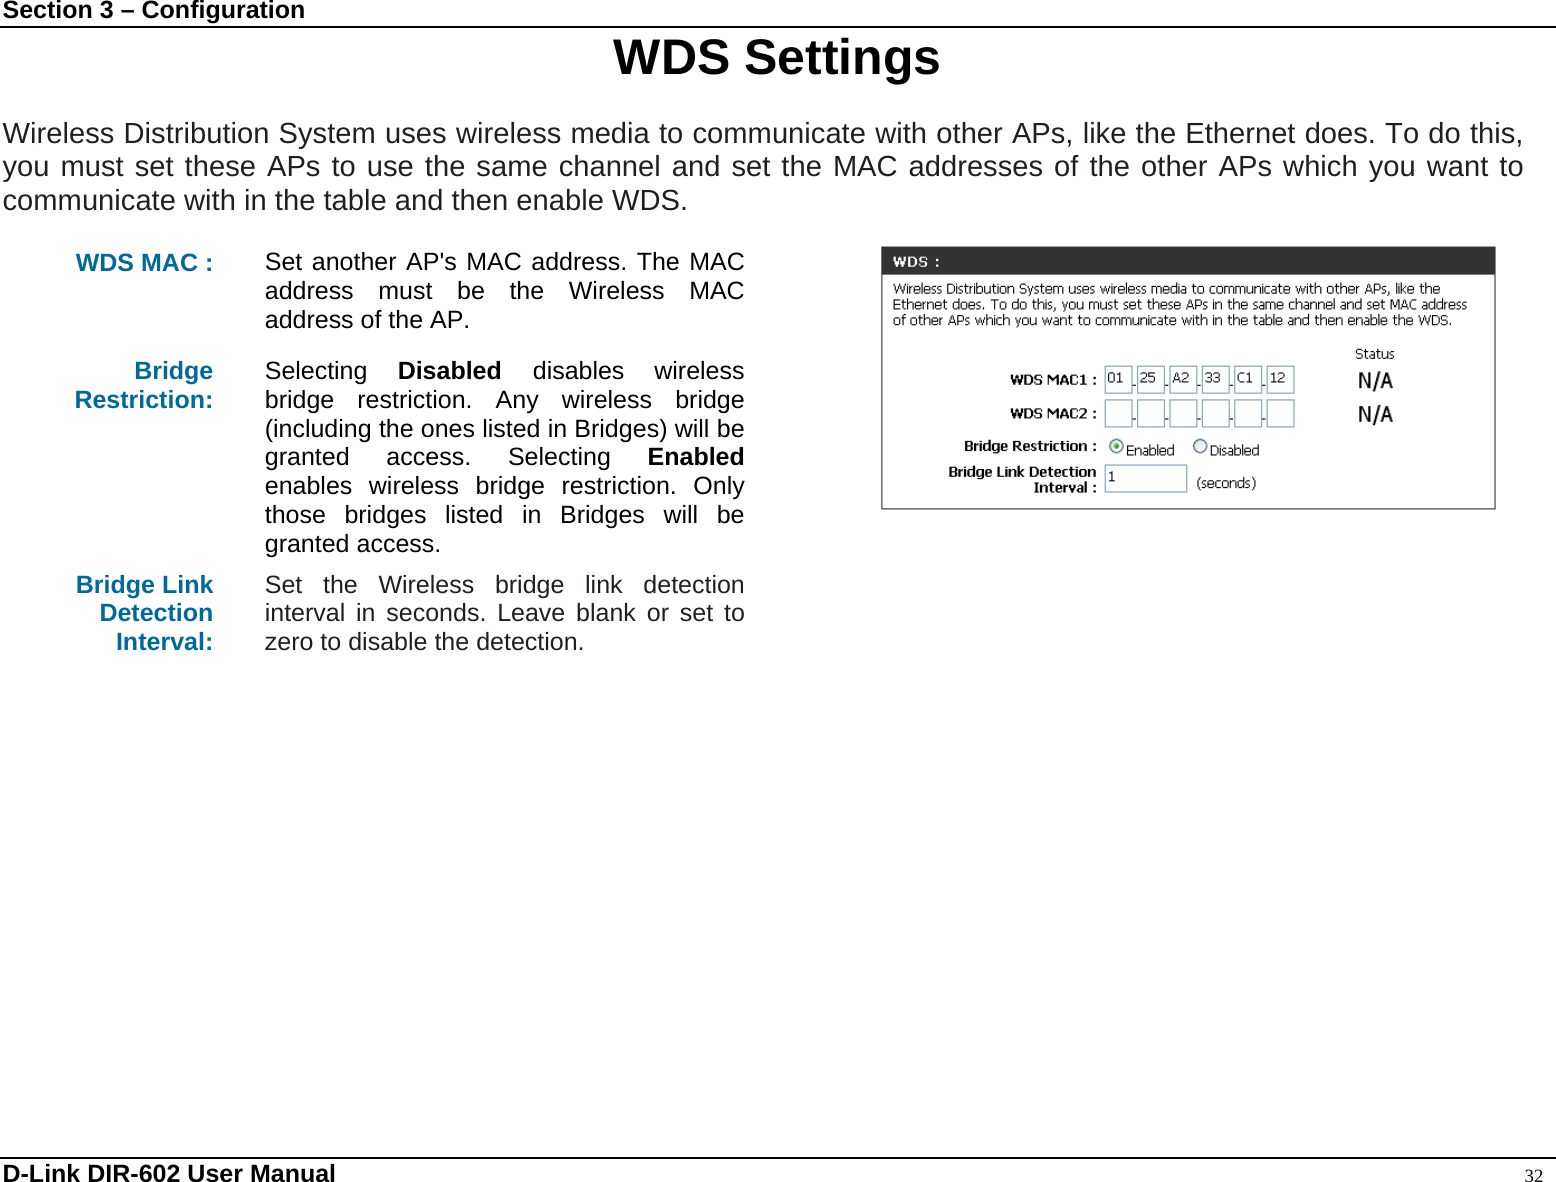 Section 3 – Configuration  WDS Settings  Wireless Distribution System uses wireless media to communicate with other APs, like the Ethernet does. To do this, you must set these APs to use the same channel and set the MAC addresses of the other APs which you want to communicate with in the table and then enable WDS.  WDS MAC :  Set another AP&apos;s MAC address. The MAC address must be the Wireless MAC address of the AP. Bridge Restriction:  Selecting  Disabled  disables wireless bridge restriction. Any wireless bridge (including the ones listed in Bridges) will be granted access. Selecting Enabled enables wireless bridge restriction. Only those bridges listed in Bridges will be granted access. Bridge Link Detection Interval:  Set the Wireless bridge link detection interval in seconds. Leave blank or set to zero to disable the detection.     D-Link DIR-602 User Manual                                                                                               32 